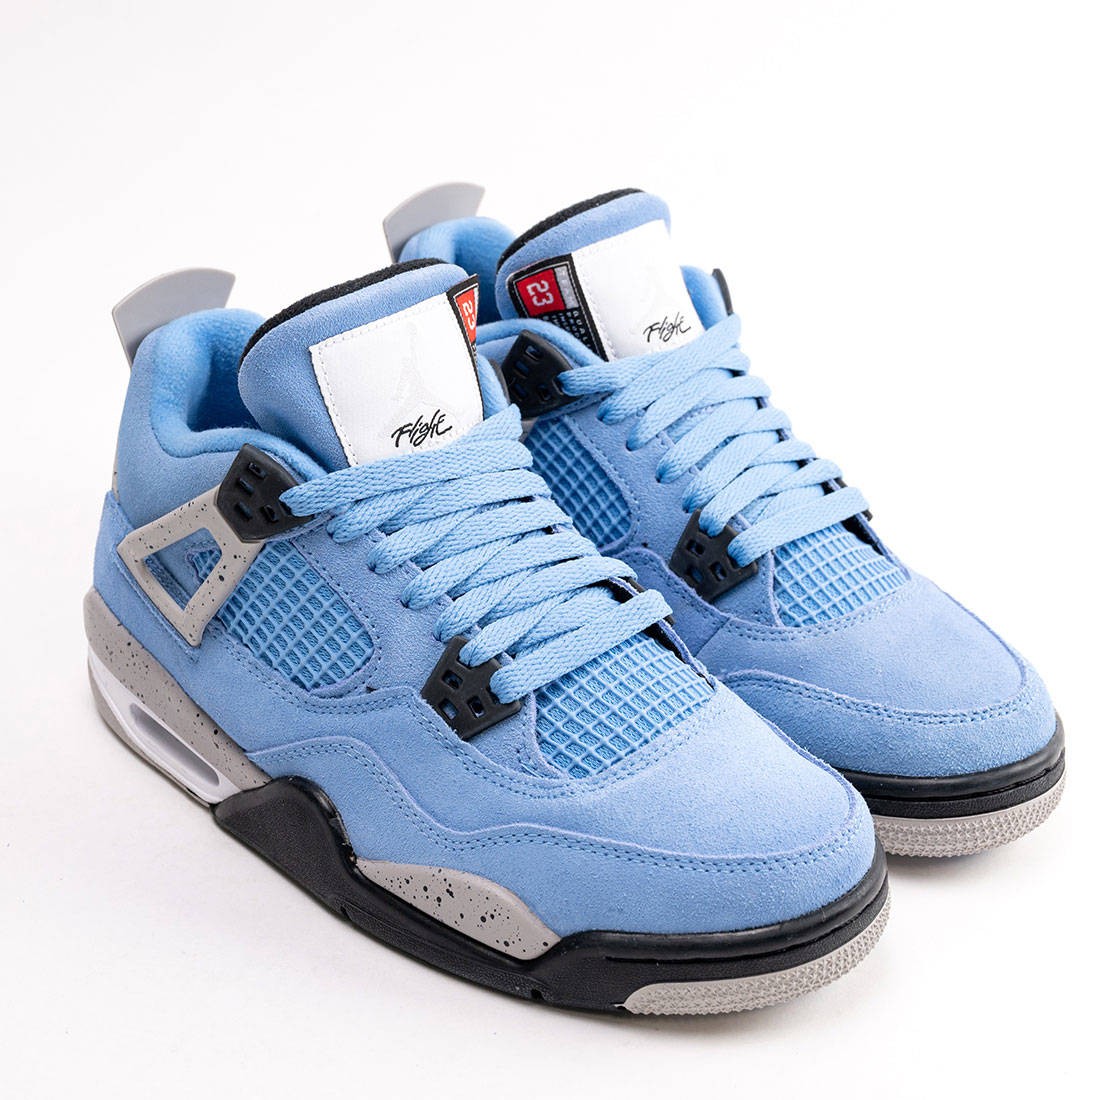 Albums 90+ Pictures Pictures Of Retro Jordans Updated